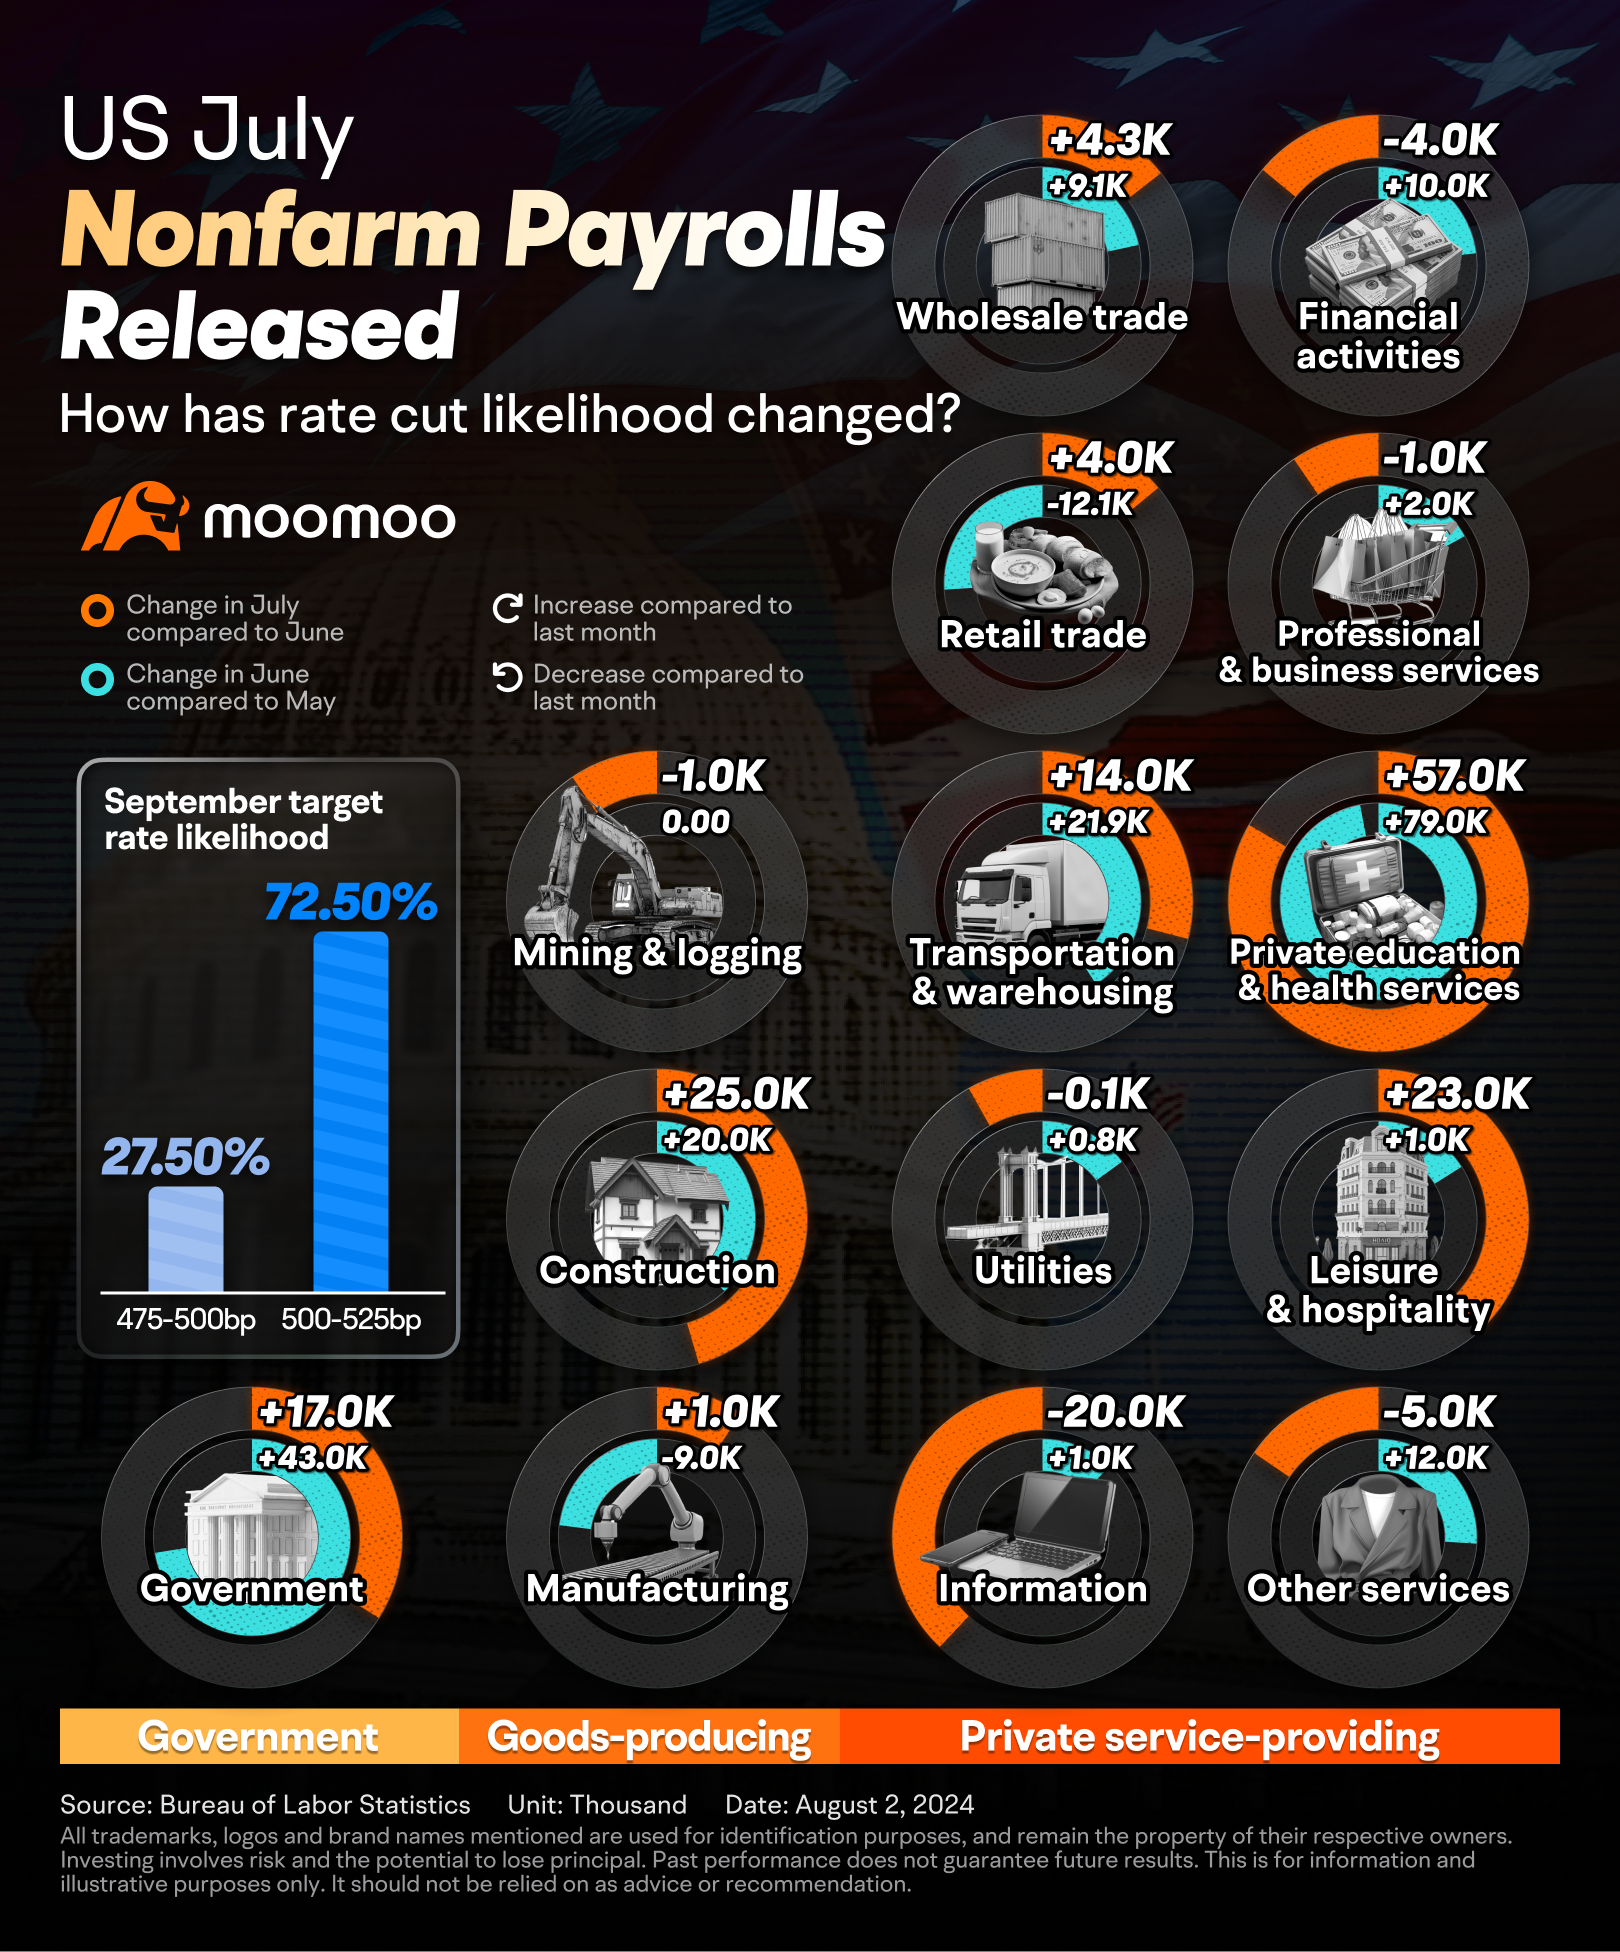 Nonfarm Payrolls Significantly Below Expectations! Are Global Stocks Starting "Recession Trade"?